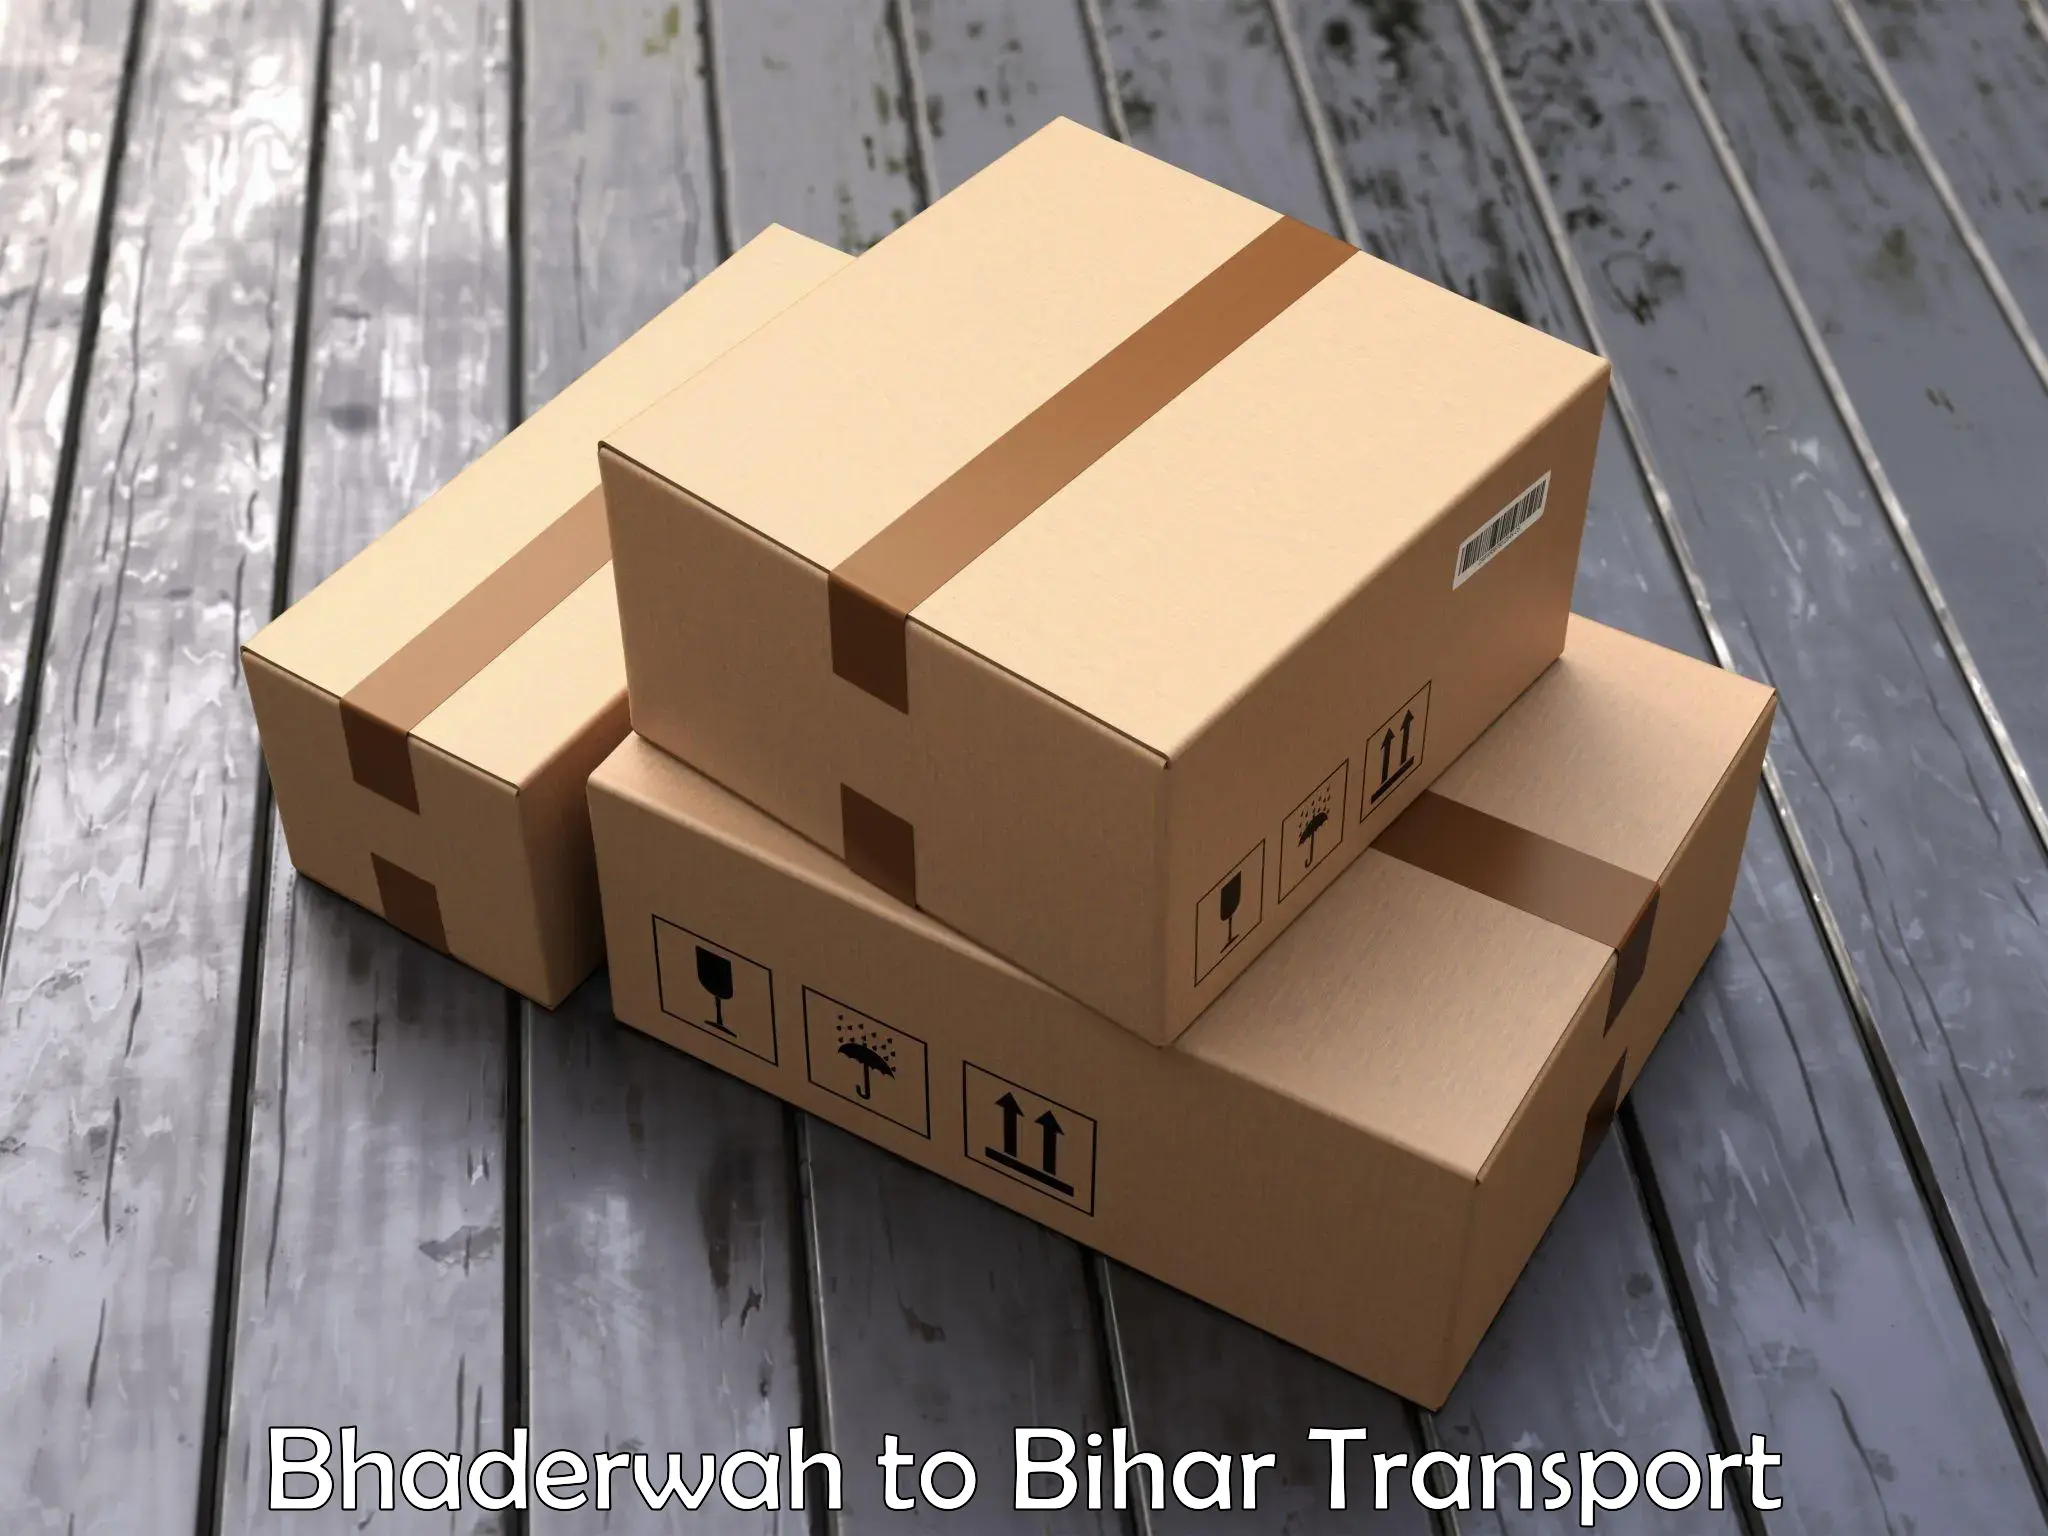 Lorry transport service in Bhaderwah to Bettiah